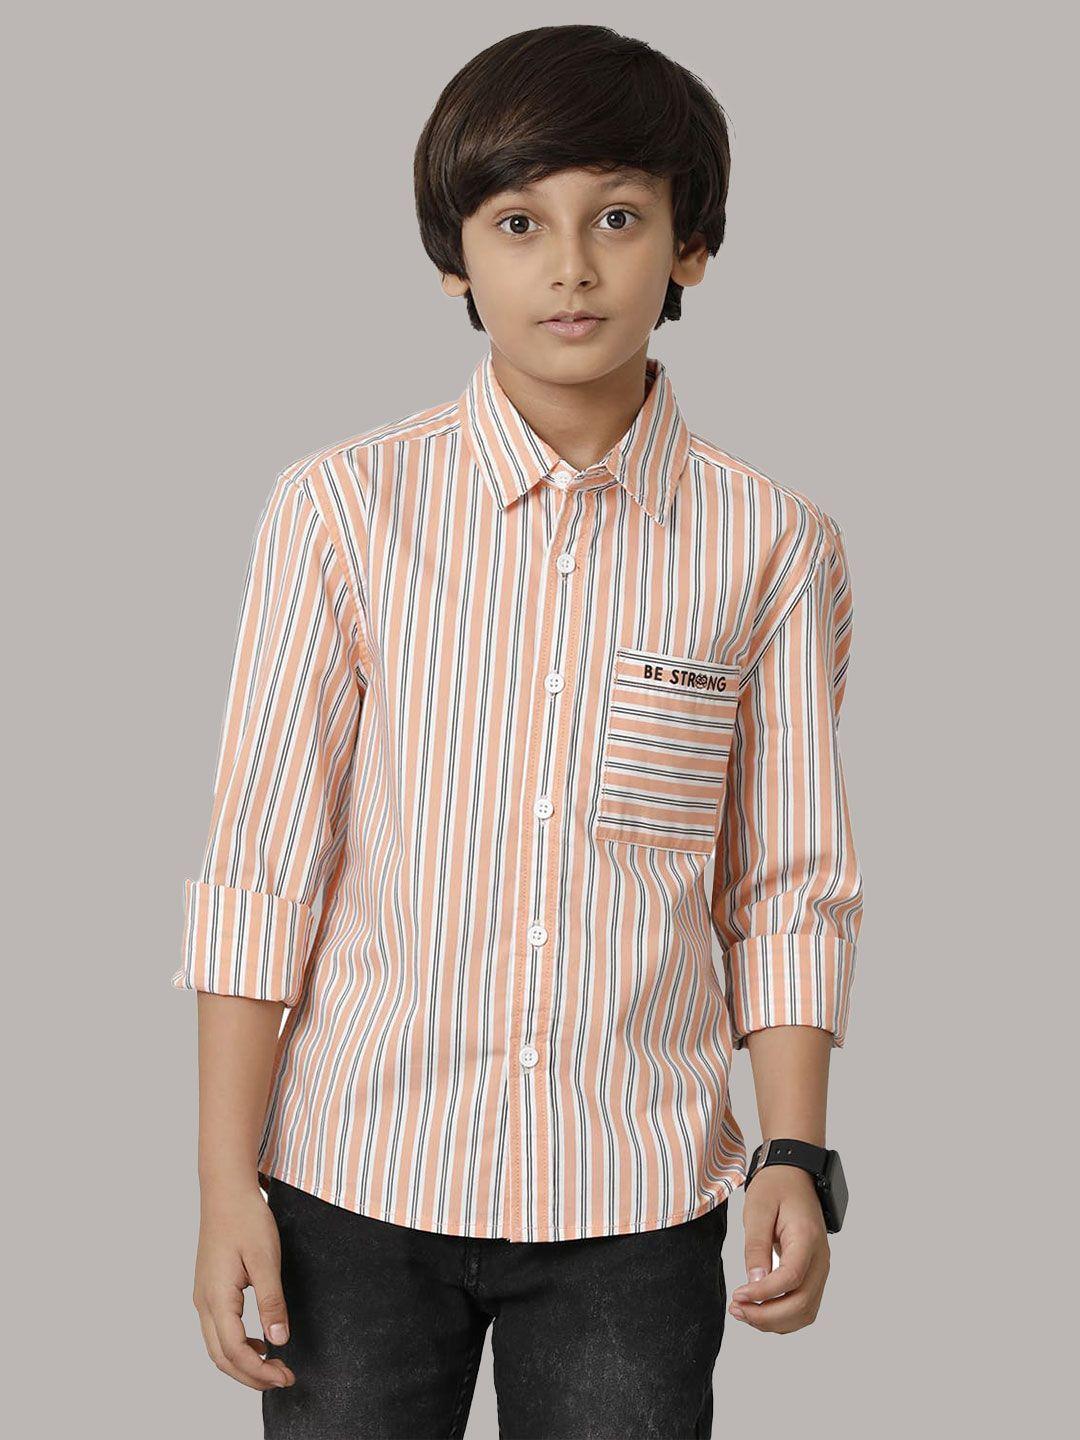 under fourteen only boys vertical striped cotton casual shirt